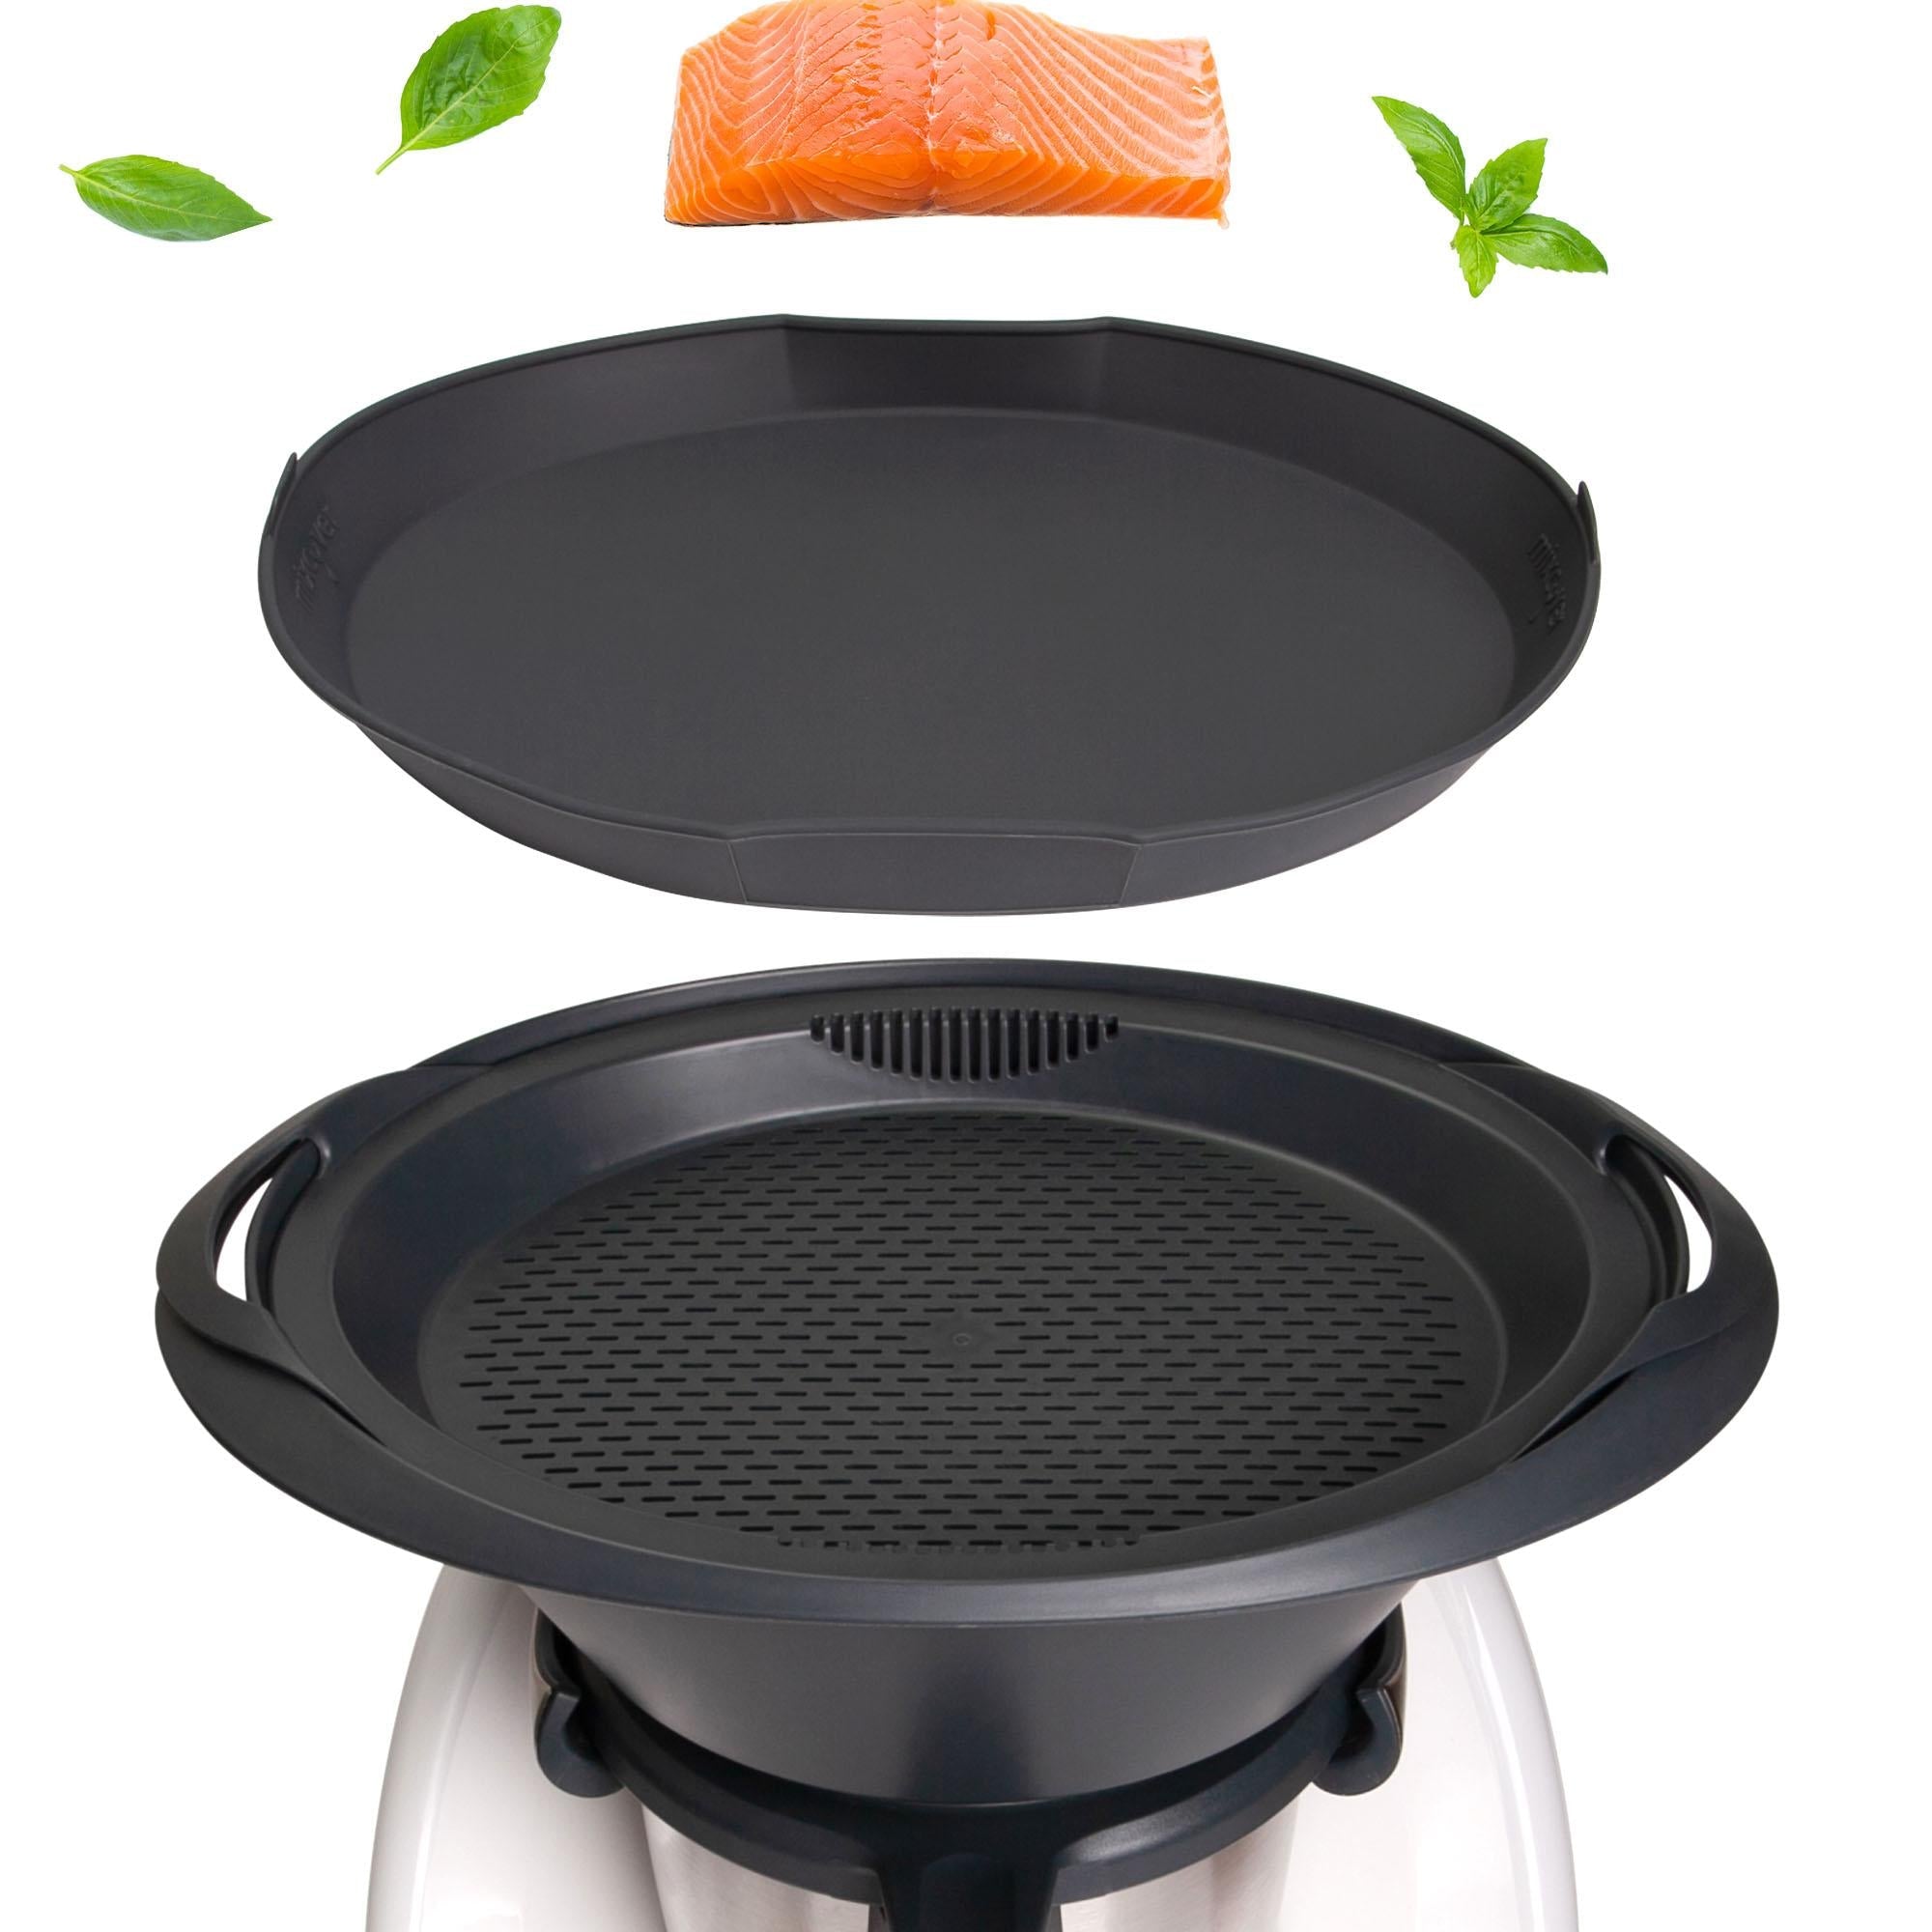 mixcover Steam cooking form silicone shape compatible with